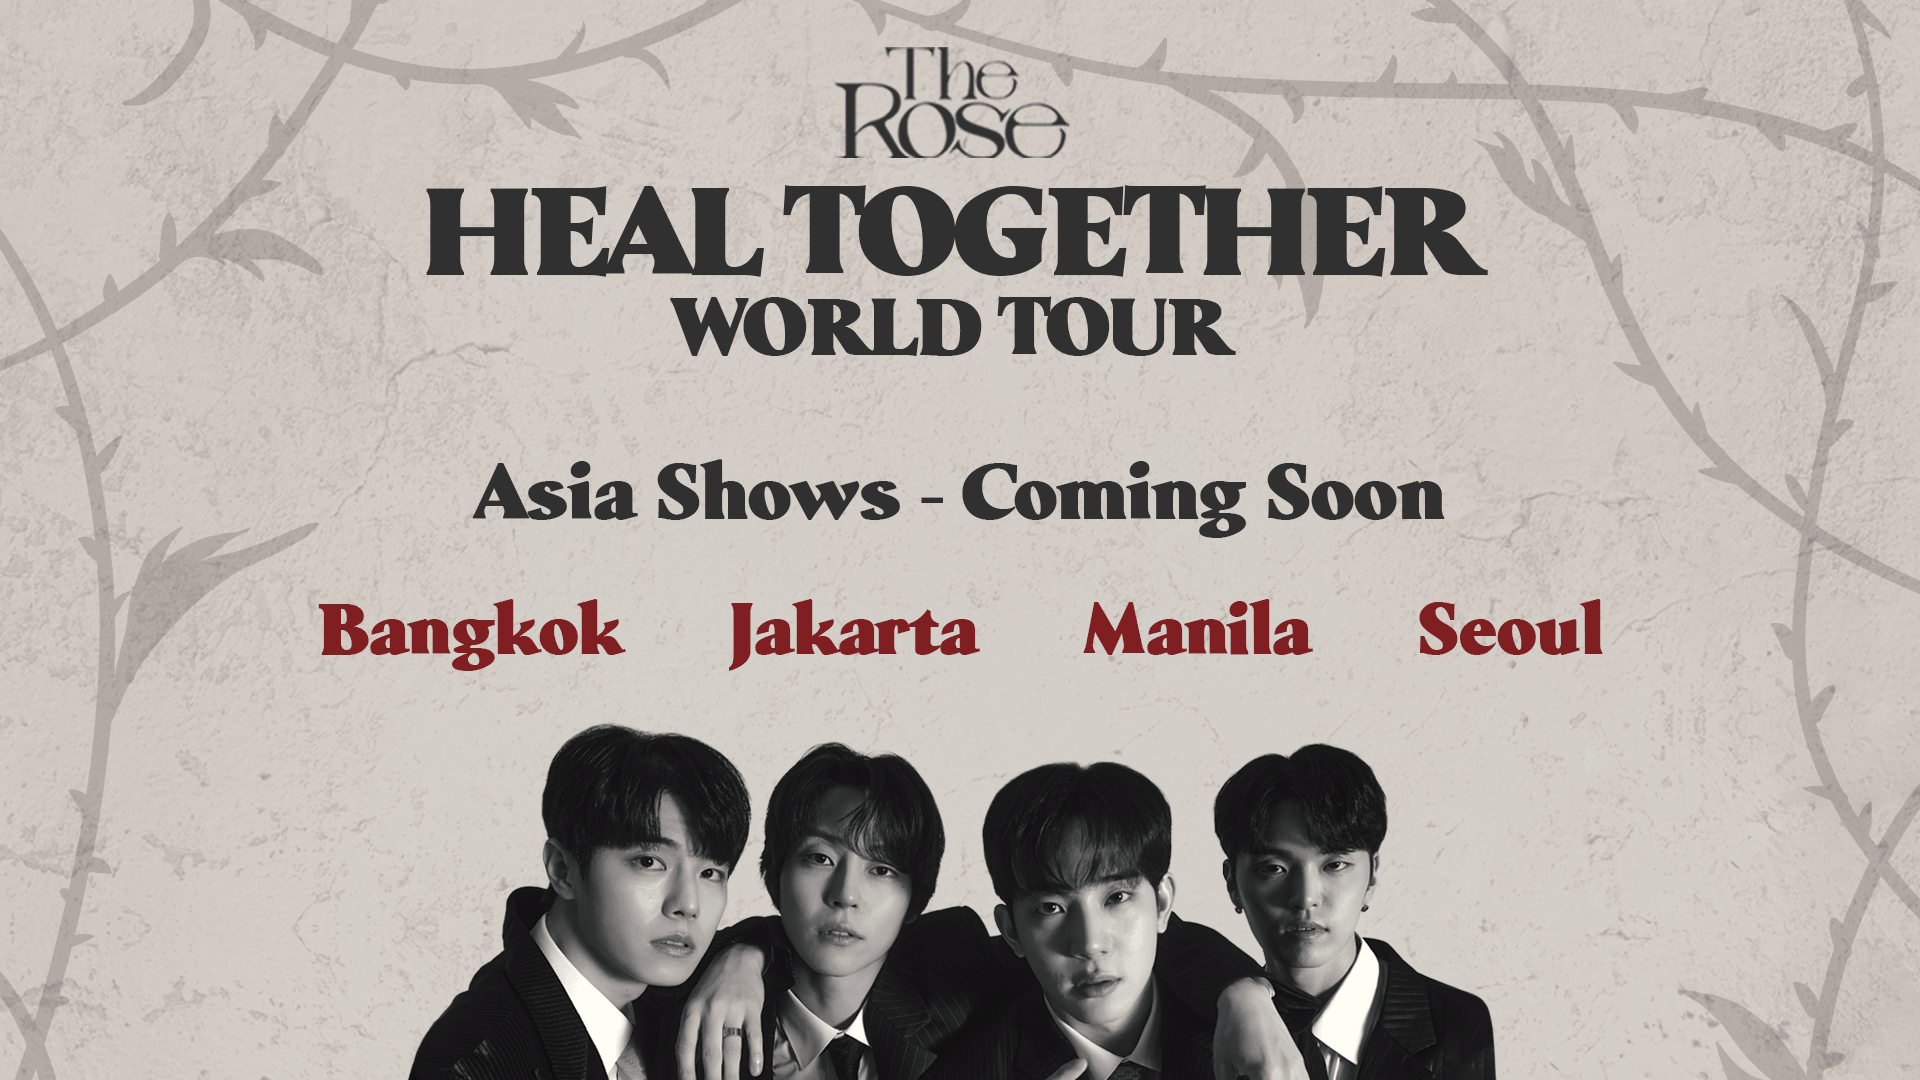 The Rose 'Heal Together' World Tour: Concert Dates and How to Get Tickets